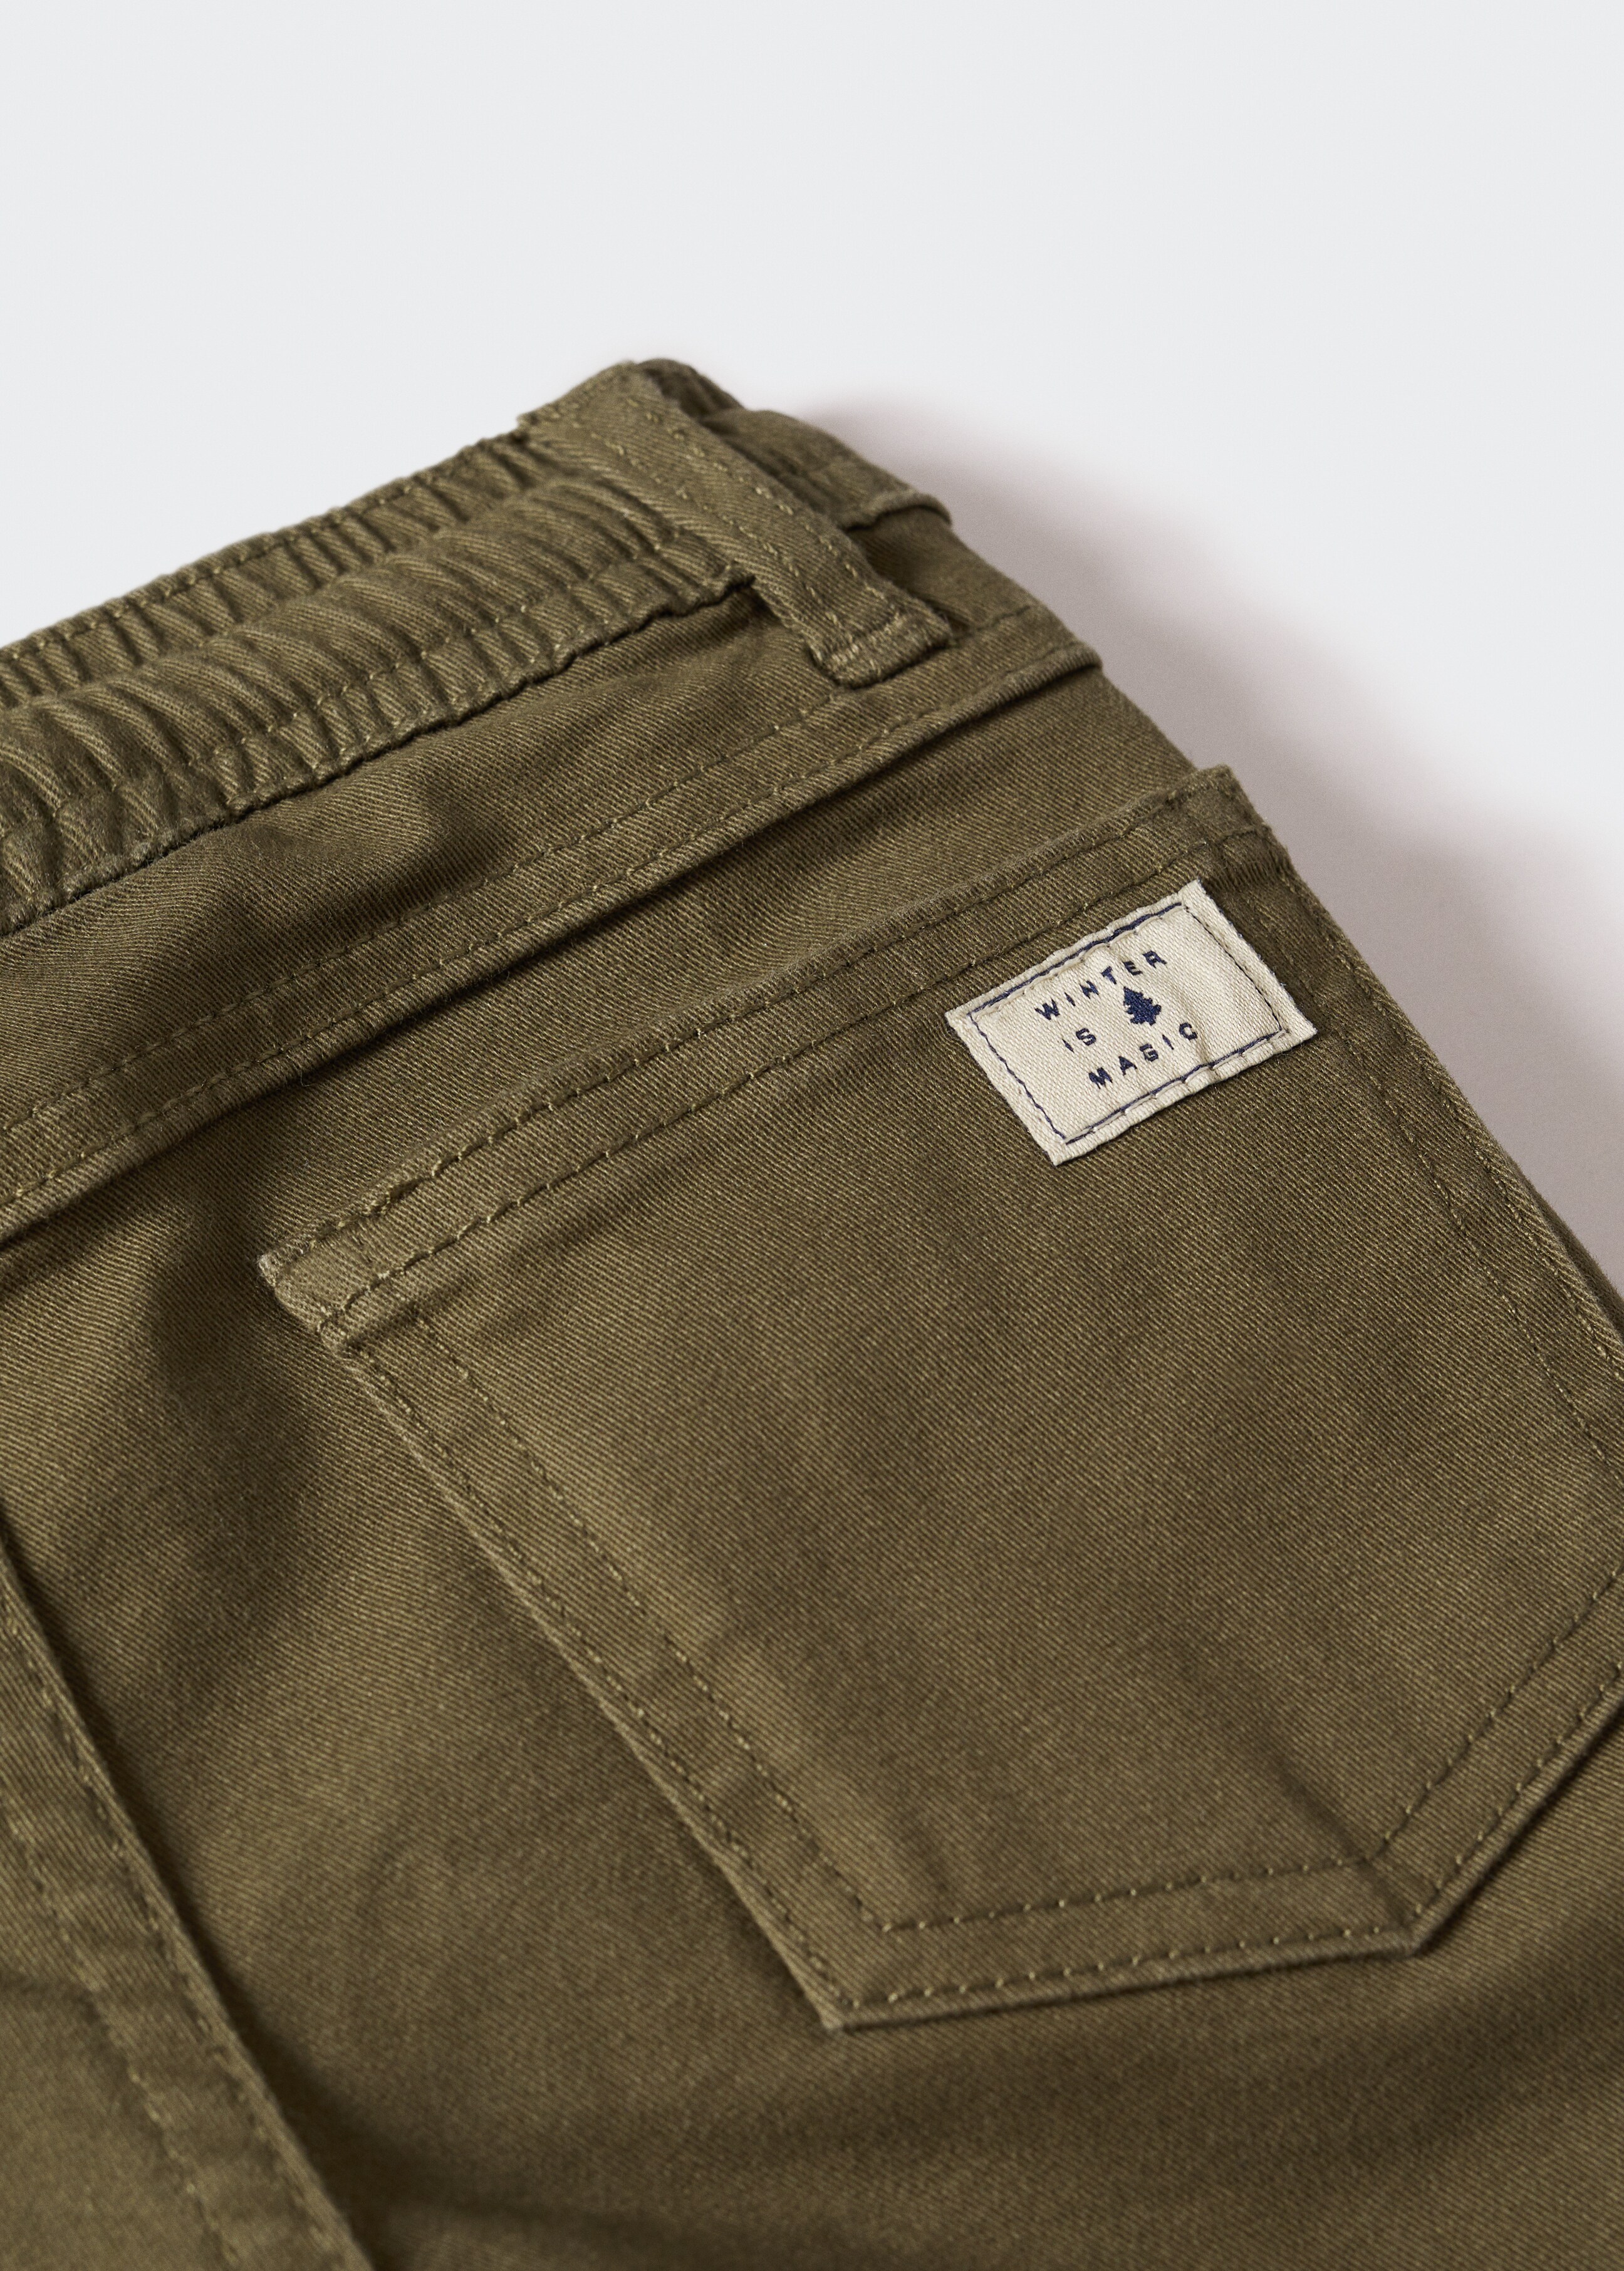 Elastic waist trousers - Details of the article 9